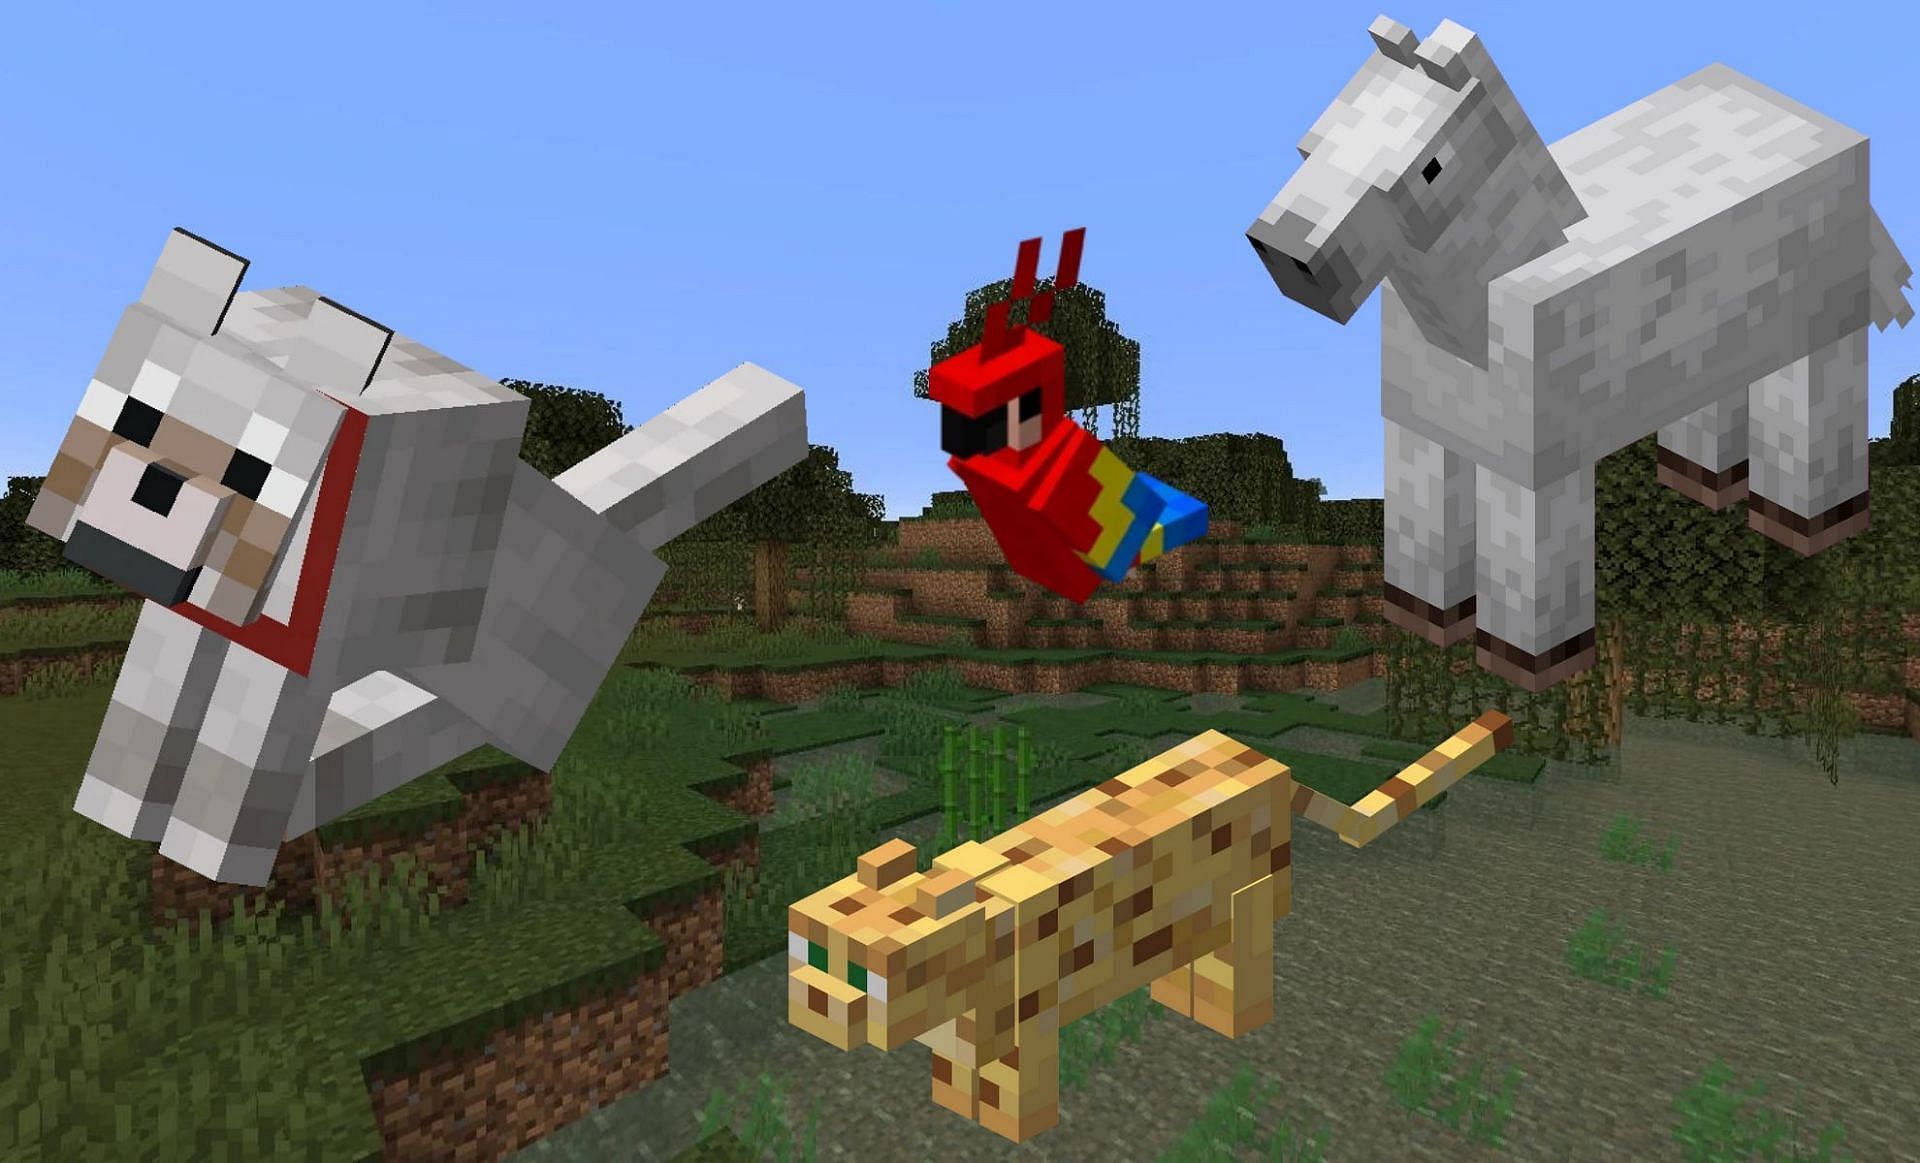 Taming mobs is one of the best mechanics in Minecraft (Image via Minecraft)